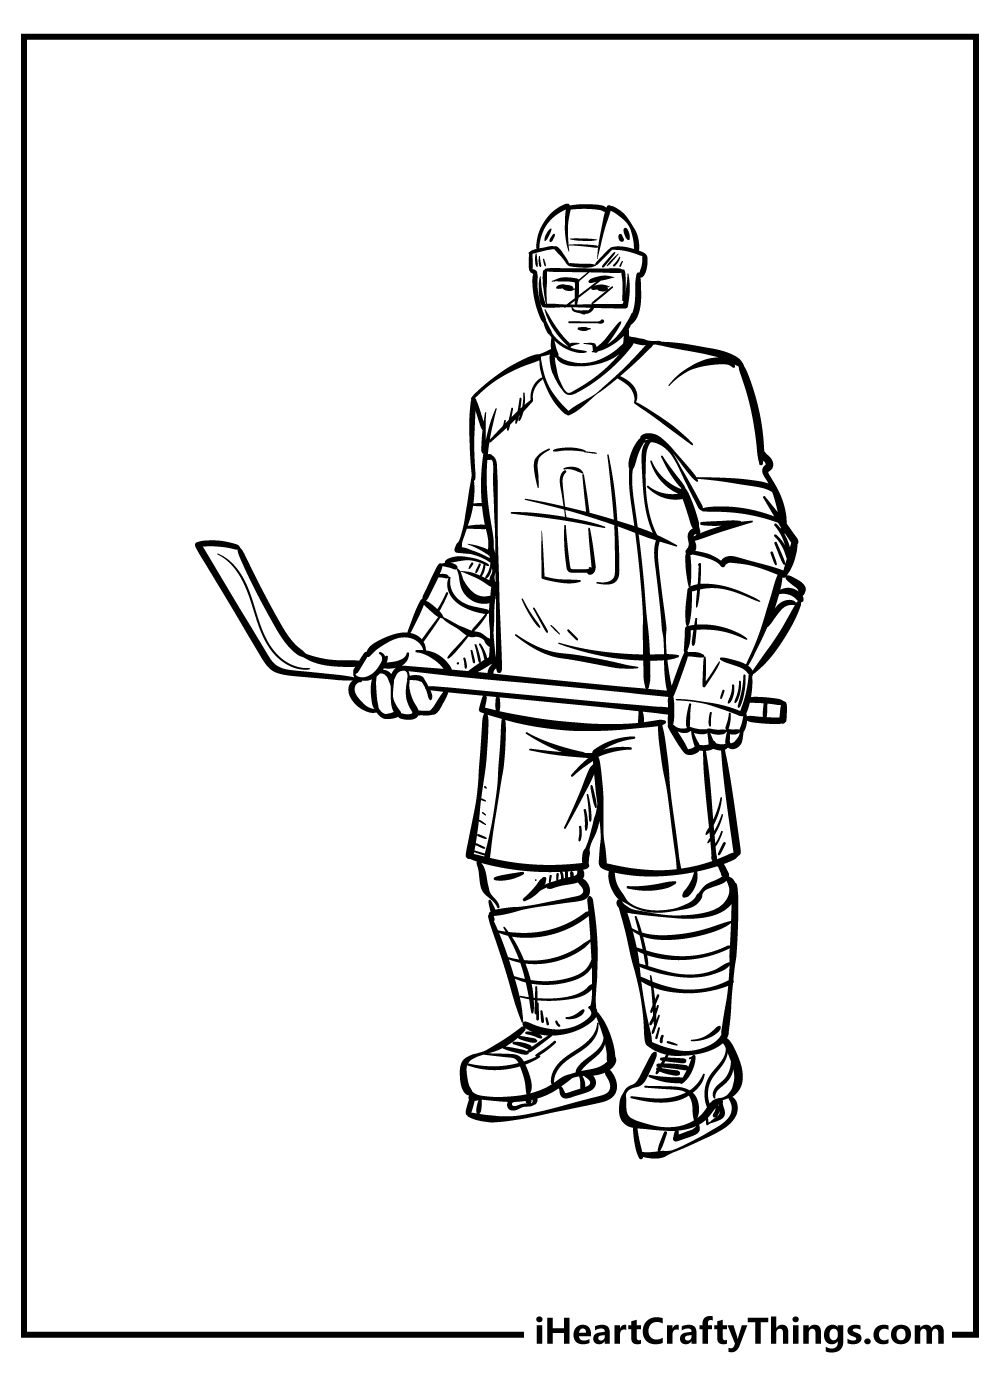 Hockey Coloring Book for kids free printable